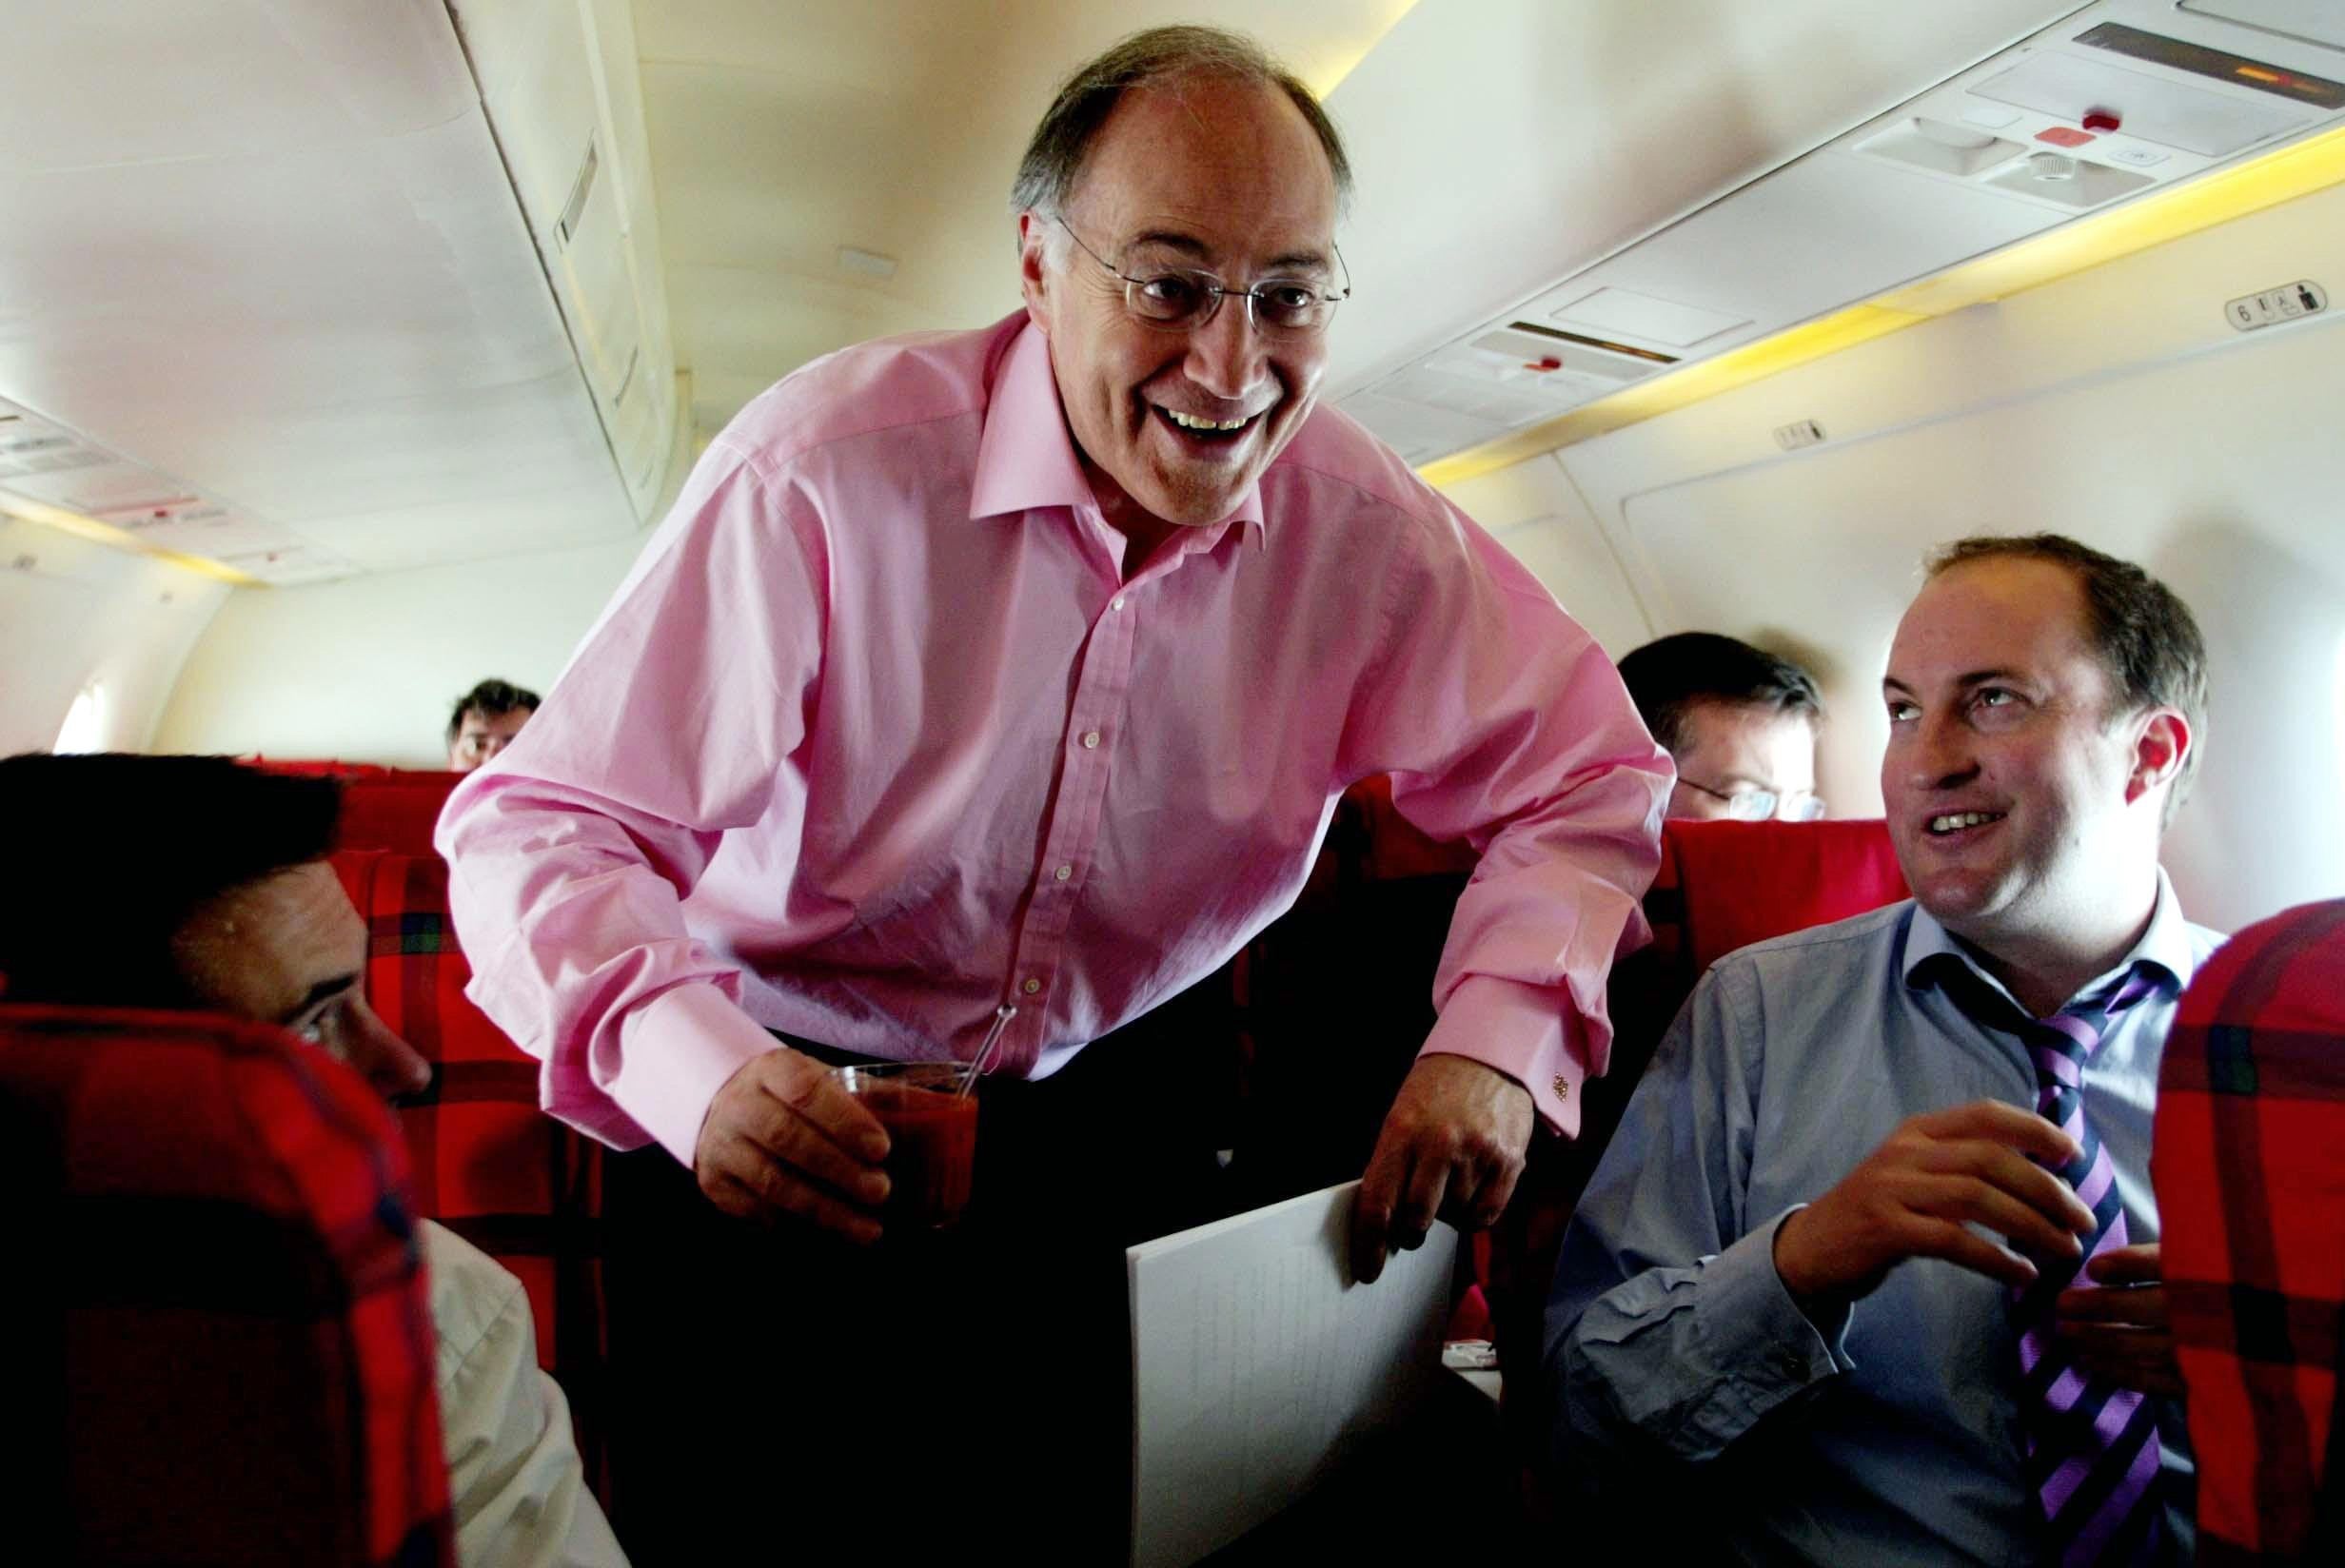 Then leader of the Conservative Party Michael Howard speaks to Guto Harri when he was political correspondent for the BBC (Andrew Parsons/PA)